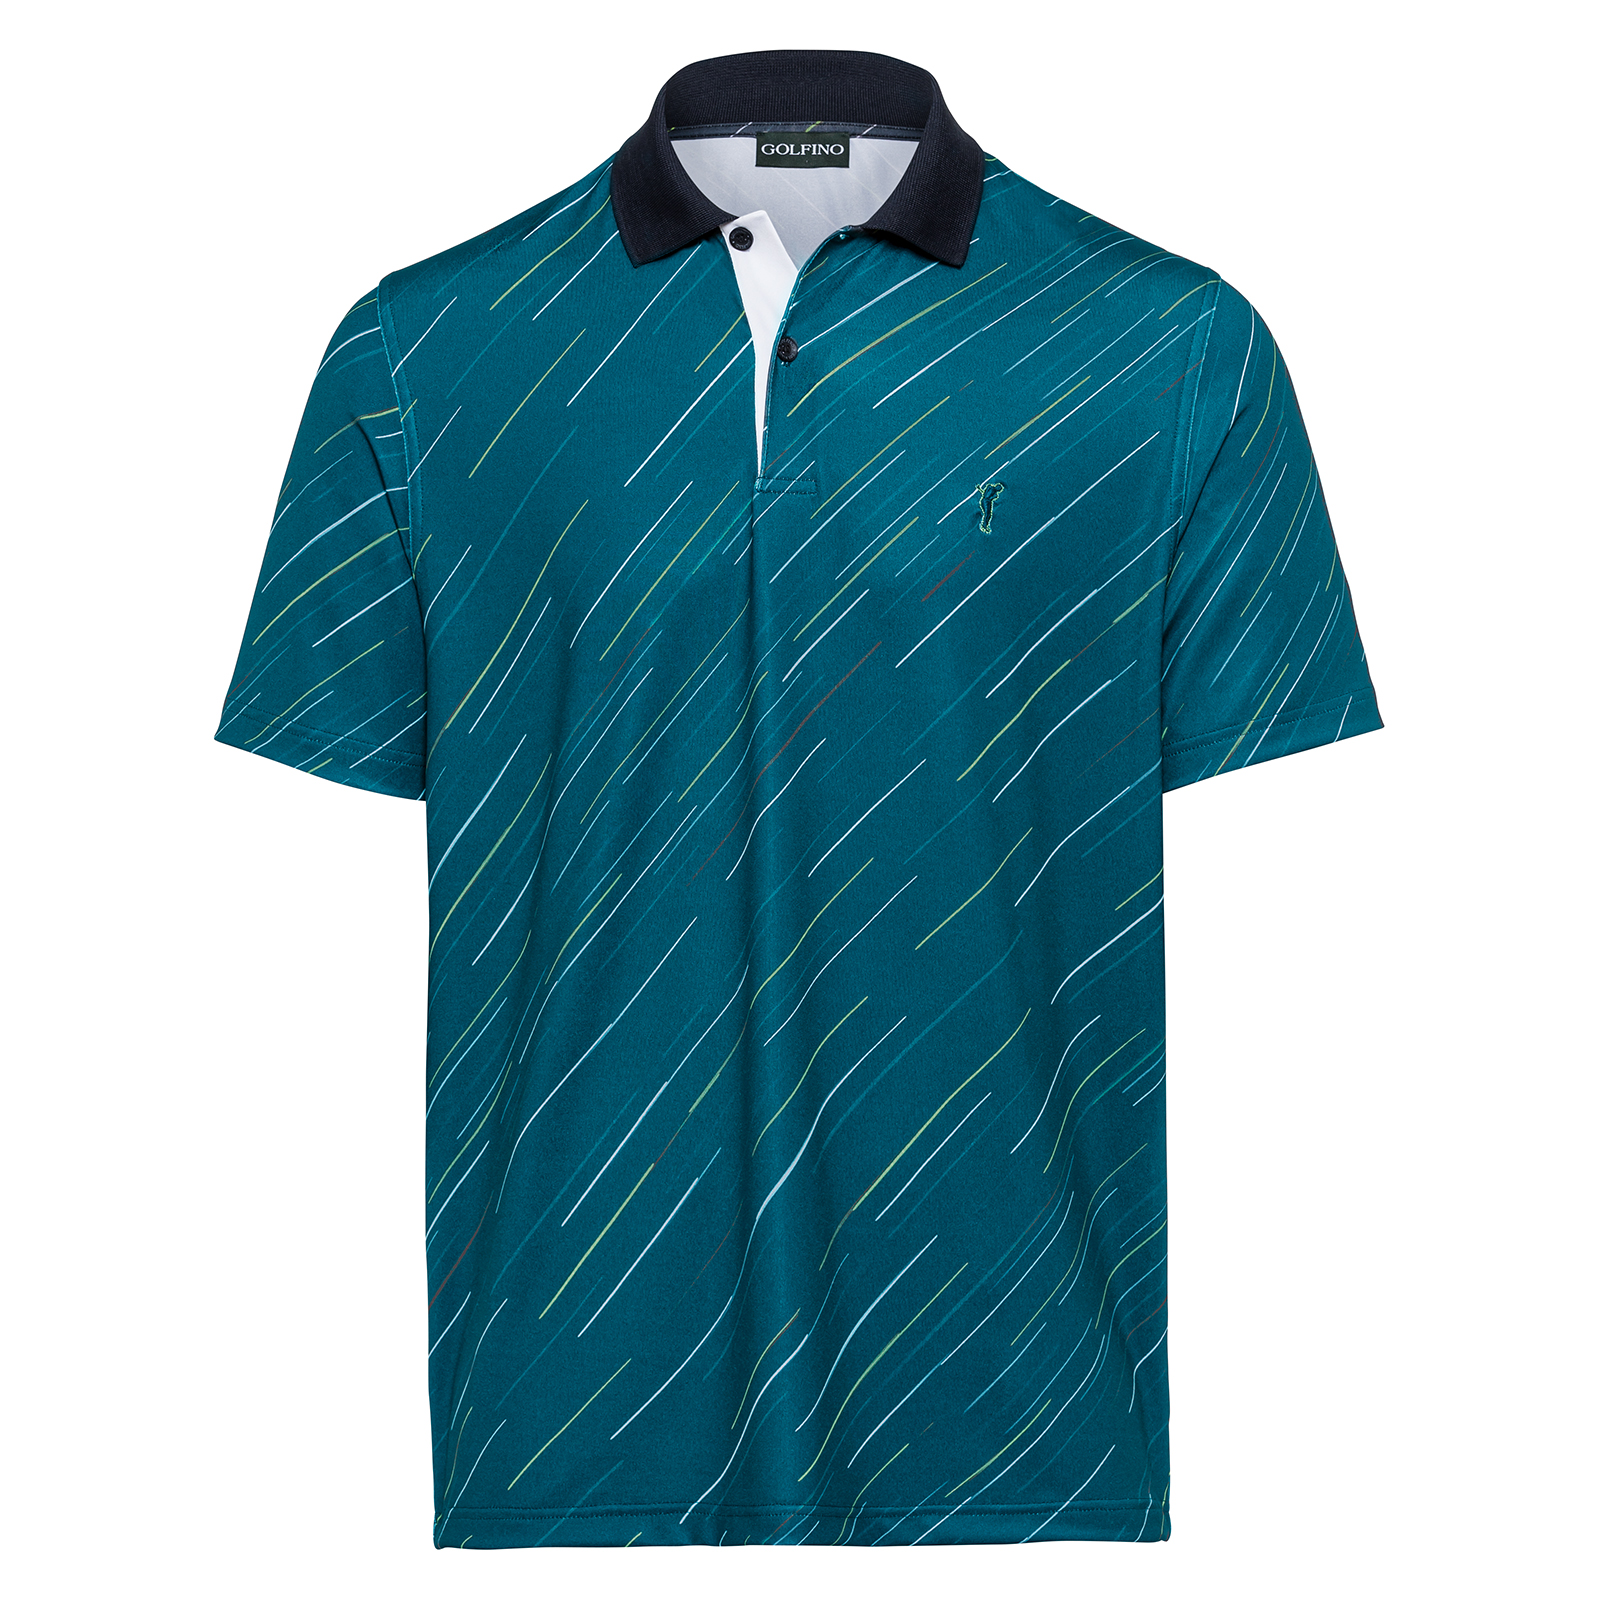 Attractively patterned men's golf polo shirt with stretch function 